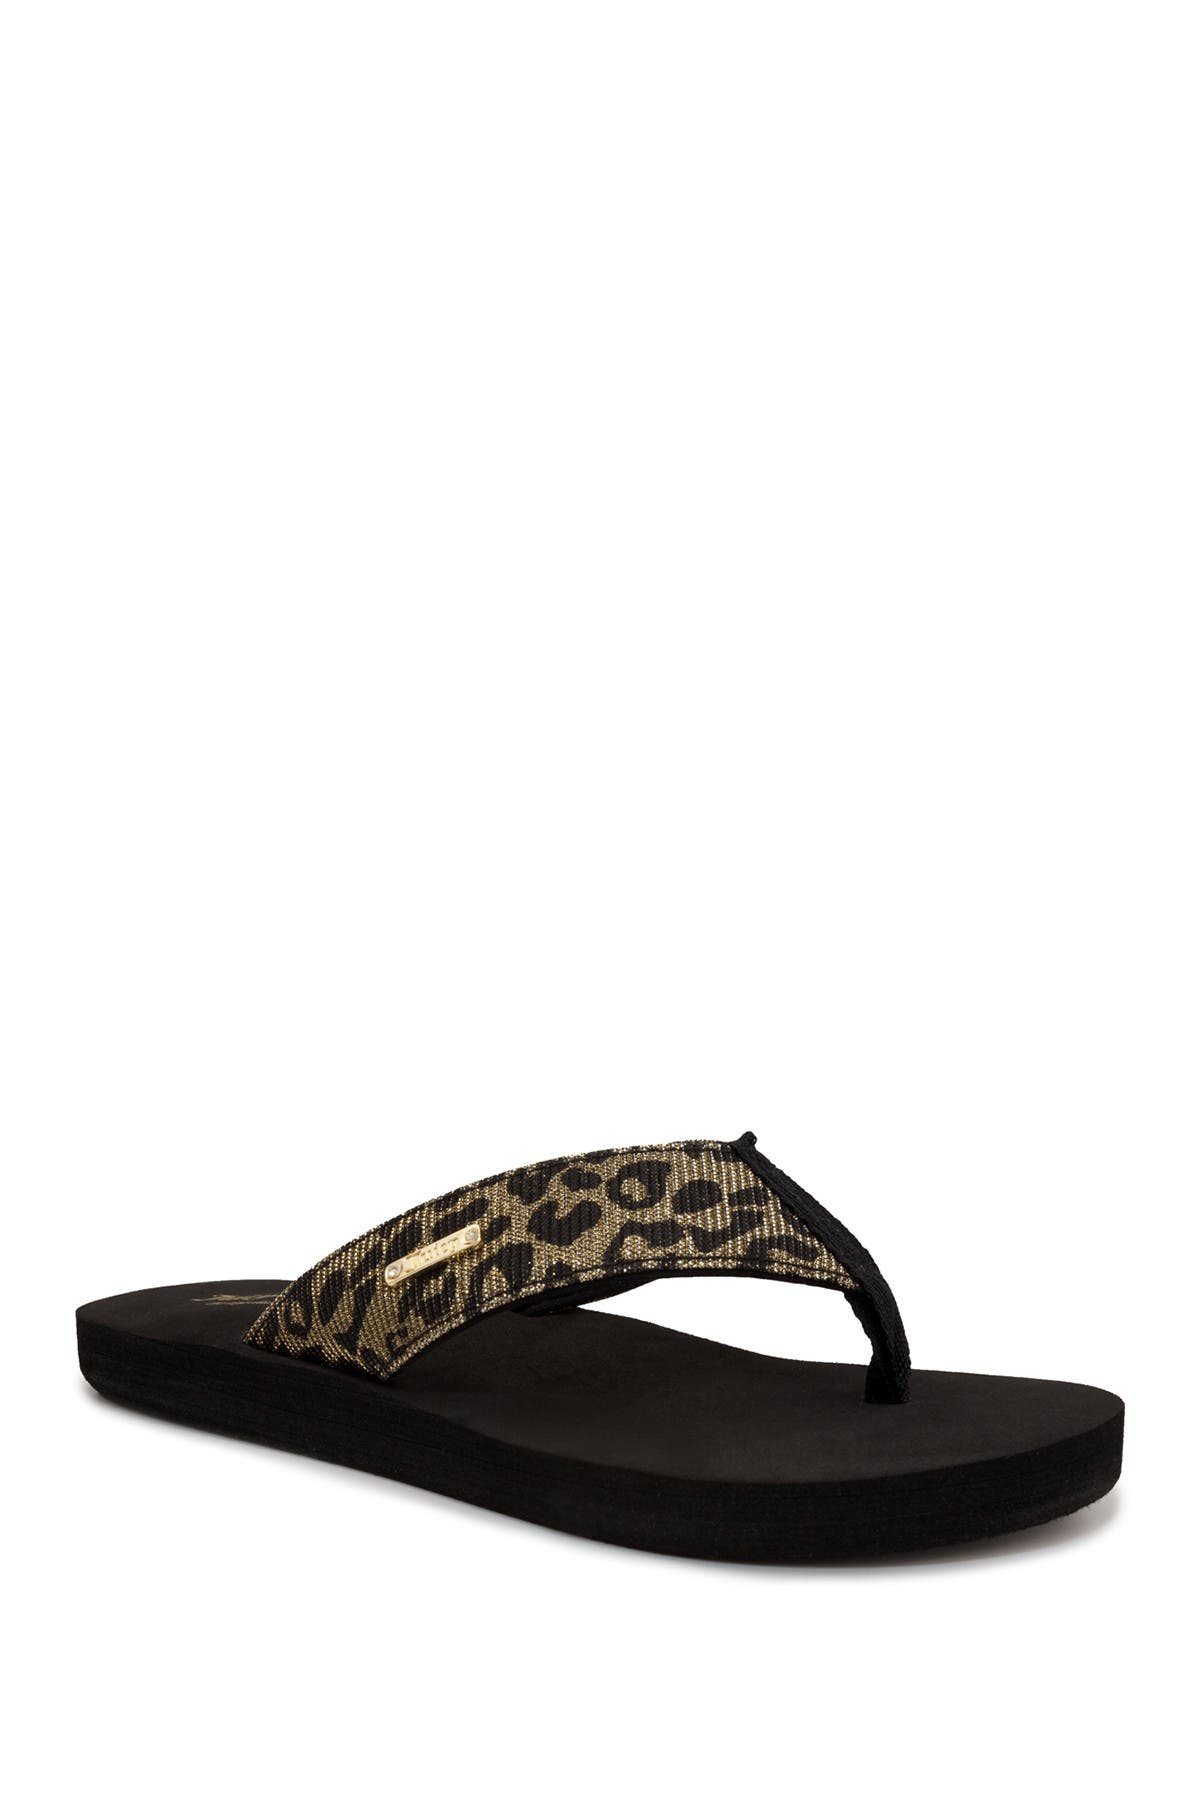 Juicy Couture Smirk Thong Sandal In Yx-blk/gold Exotic G